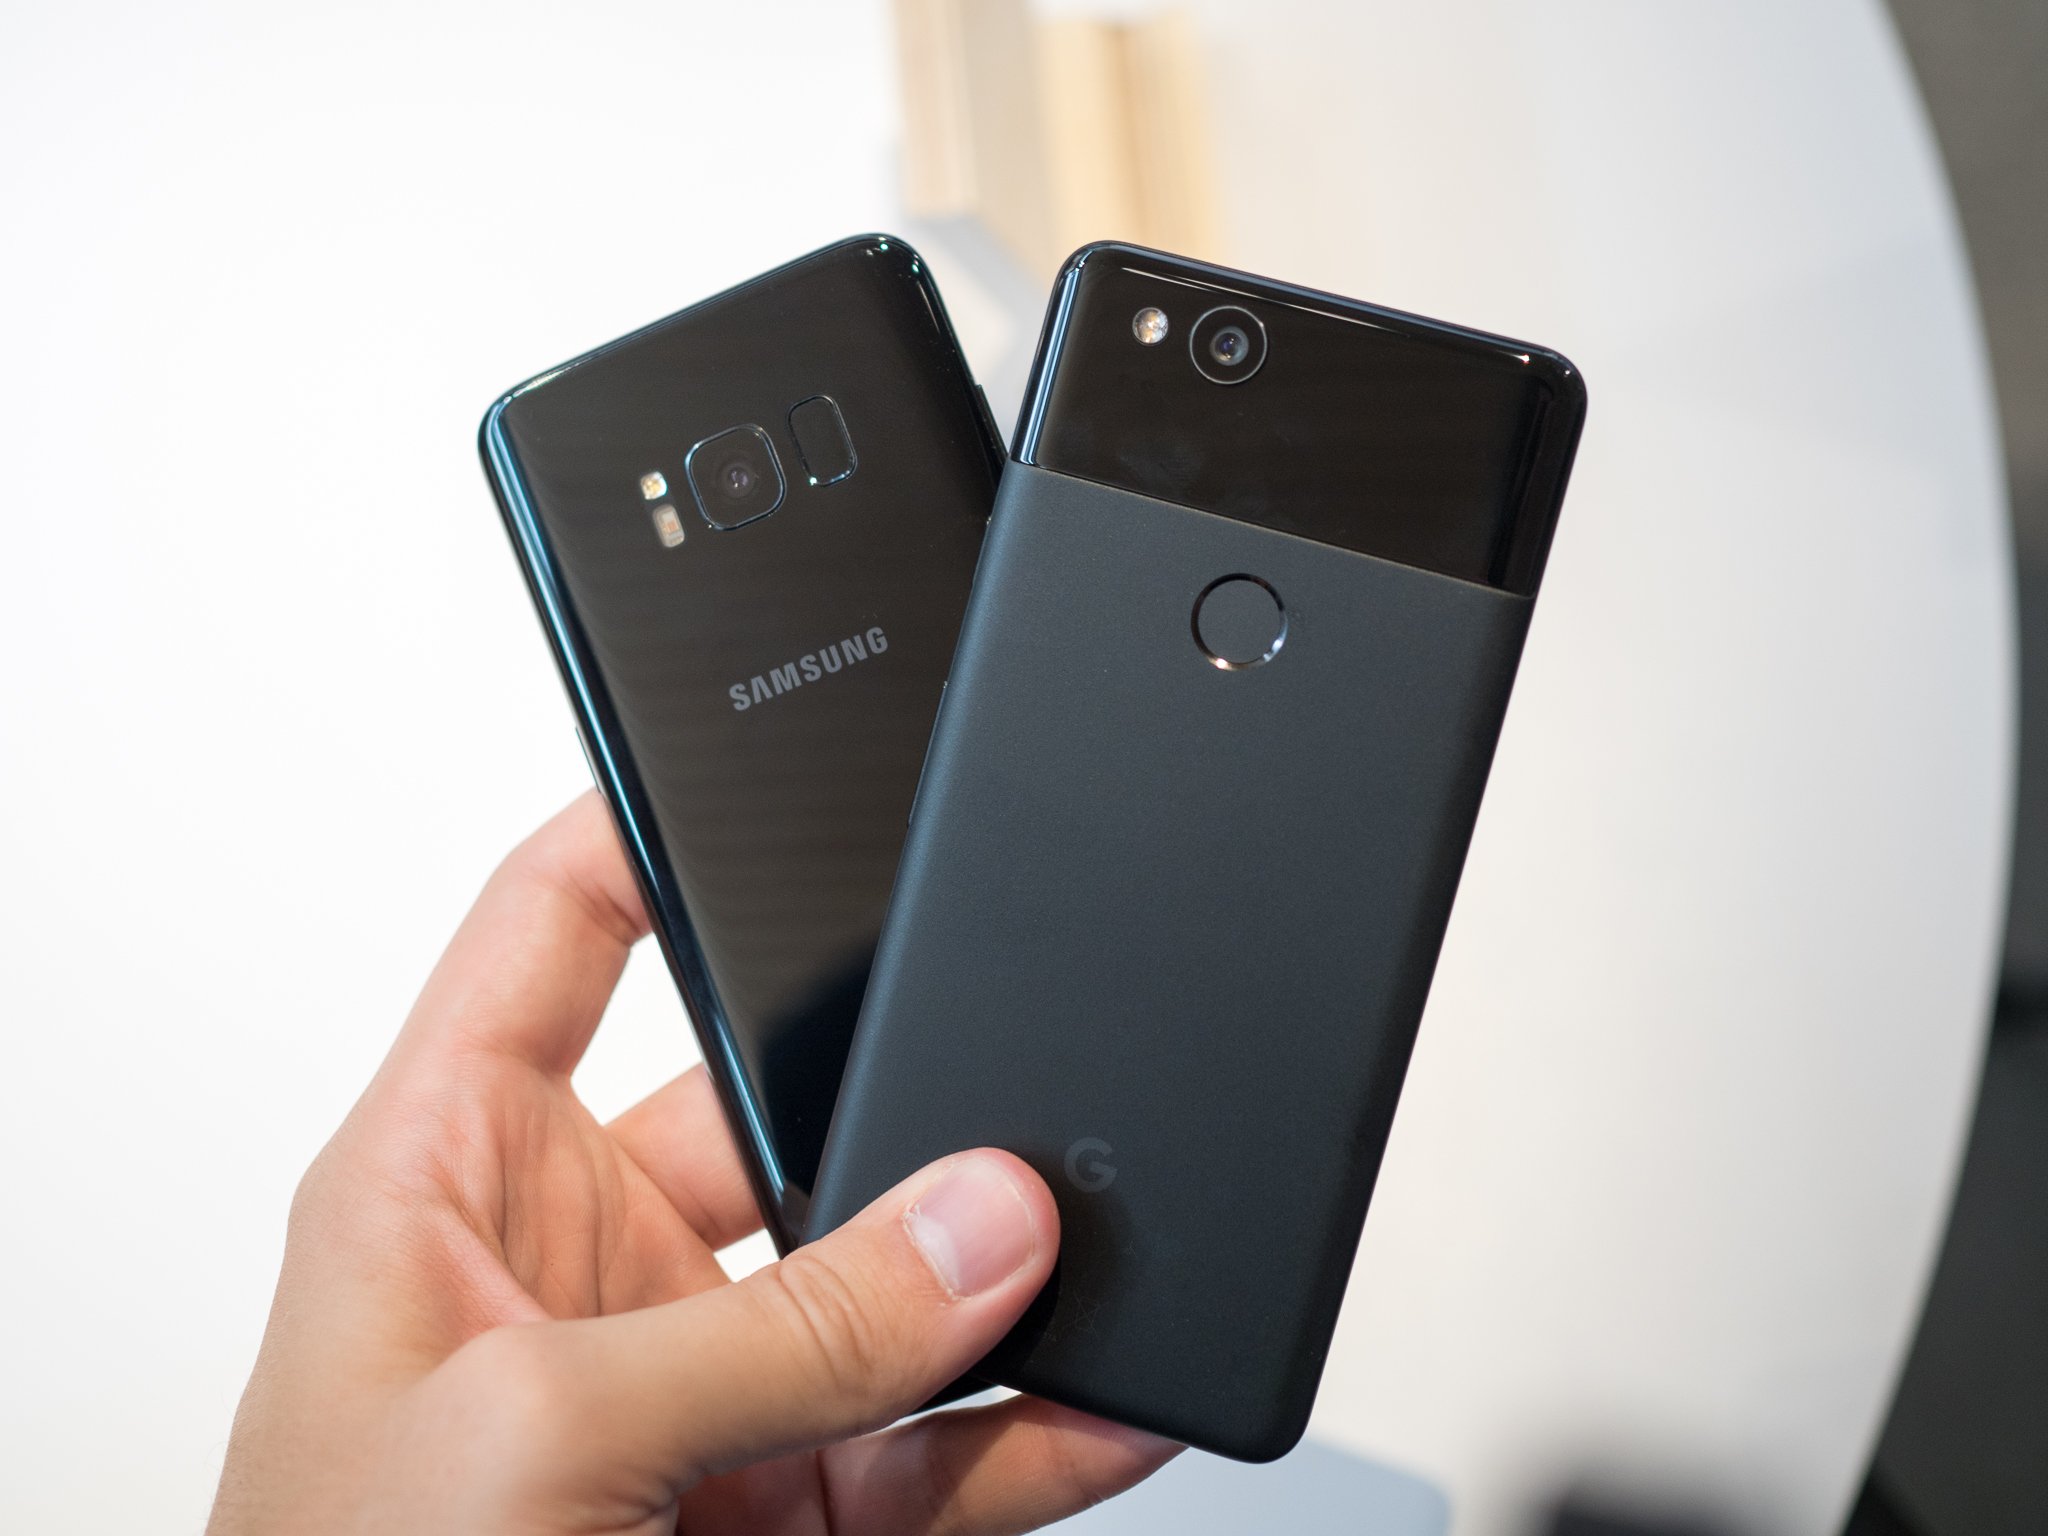 Google Pixel 2 and Galaxy S8